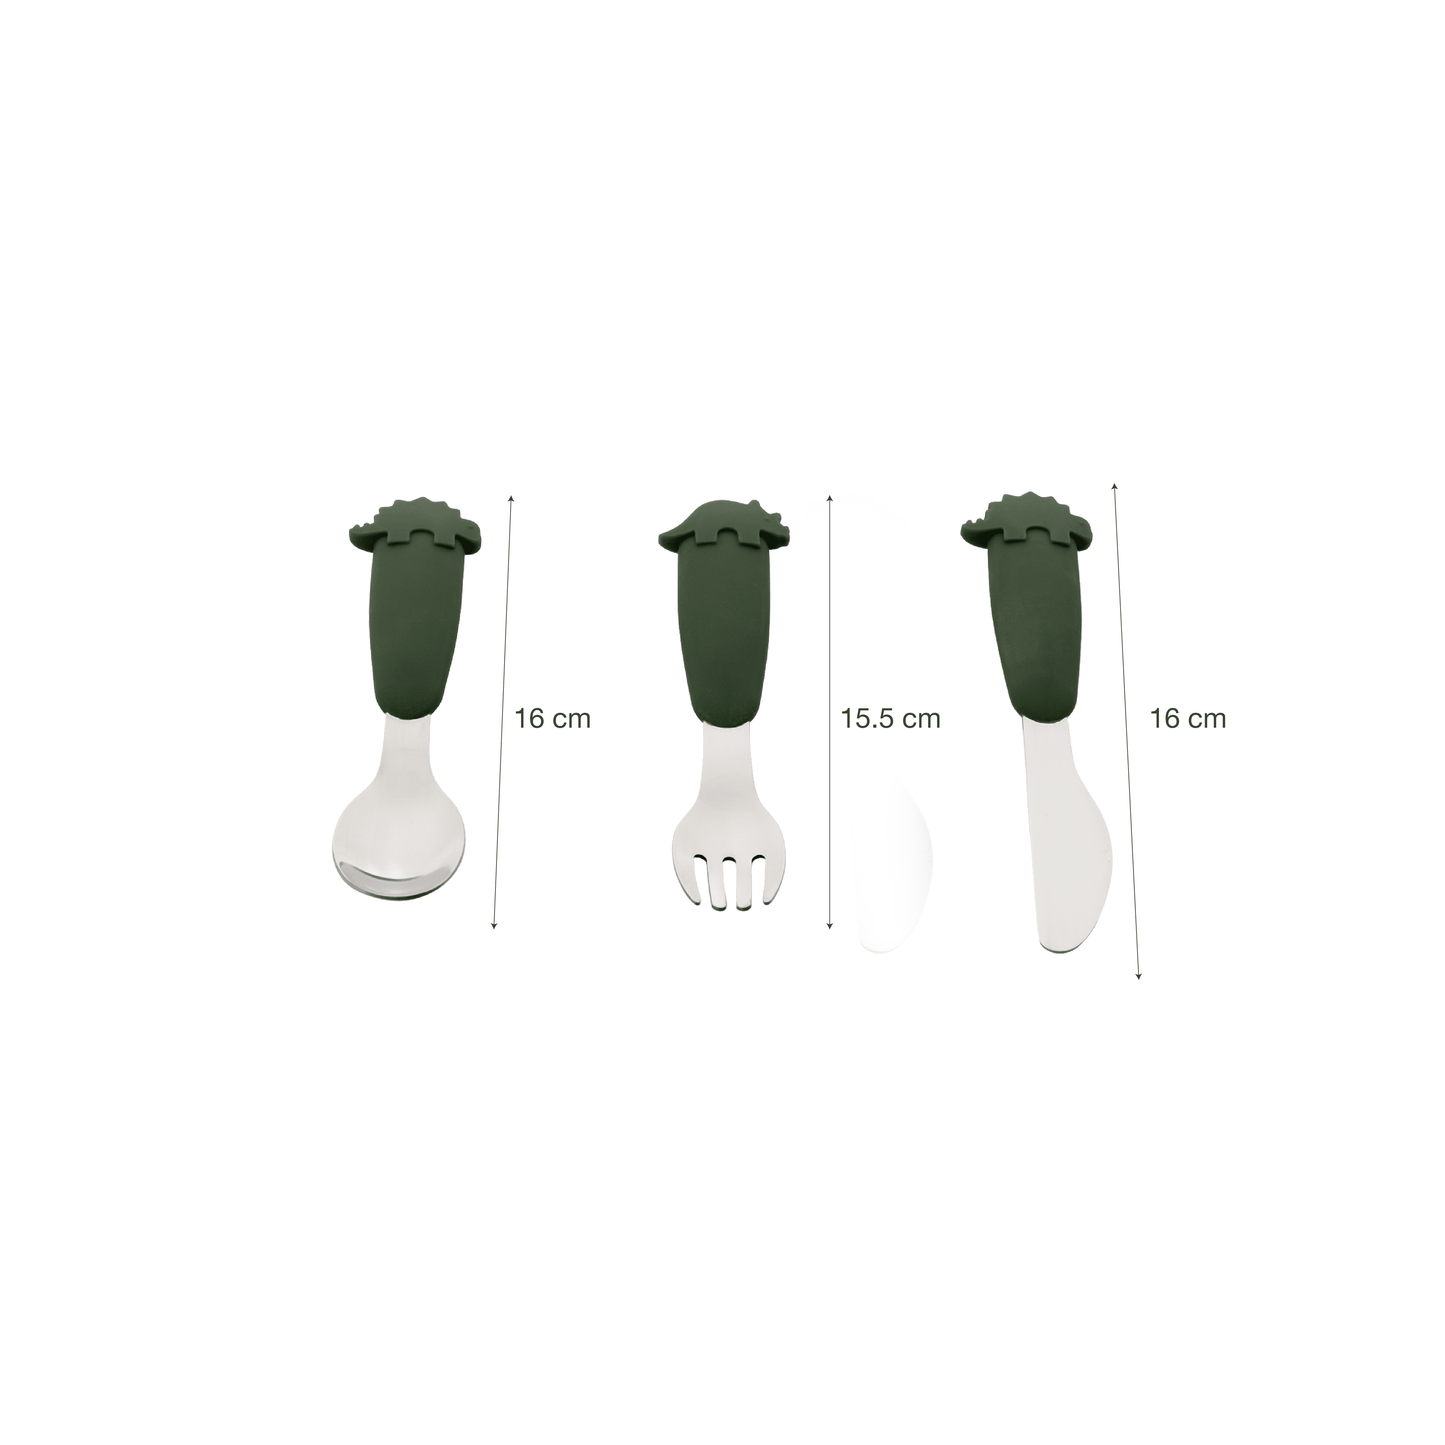 Cutlery Set (stainless steel) - 3 piece - Dino Green